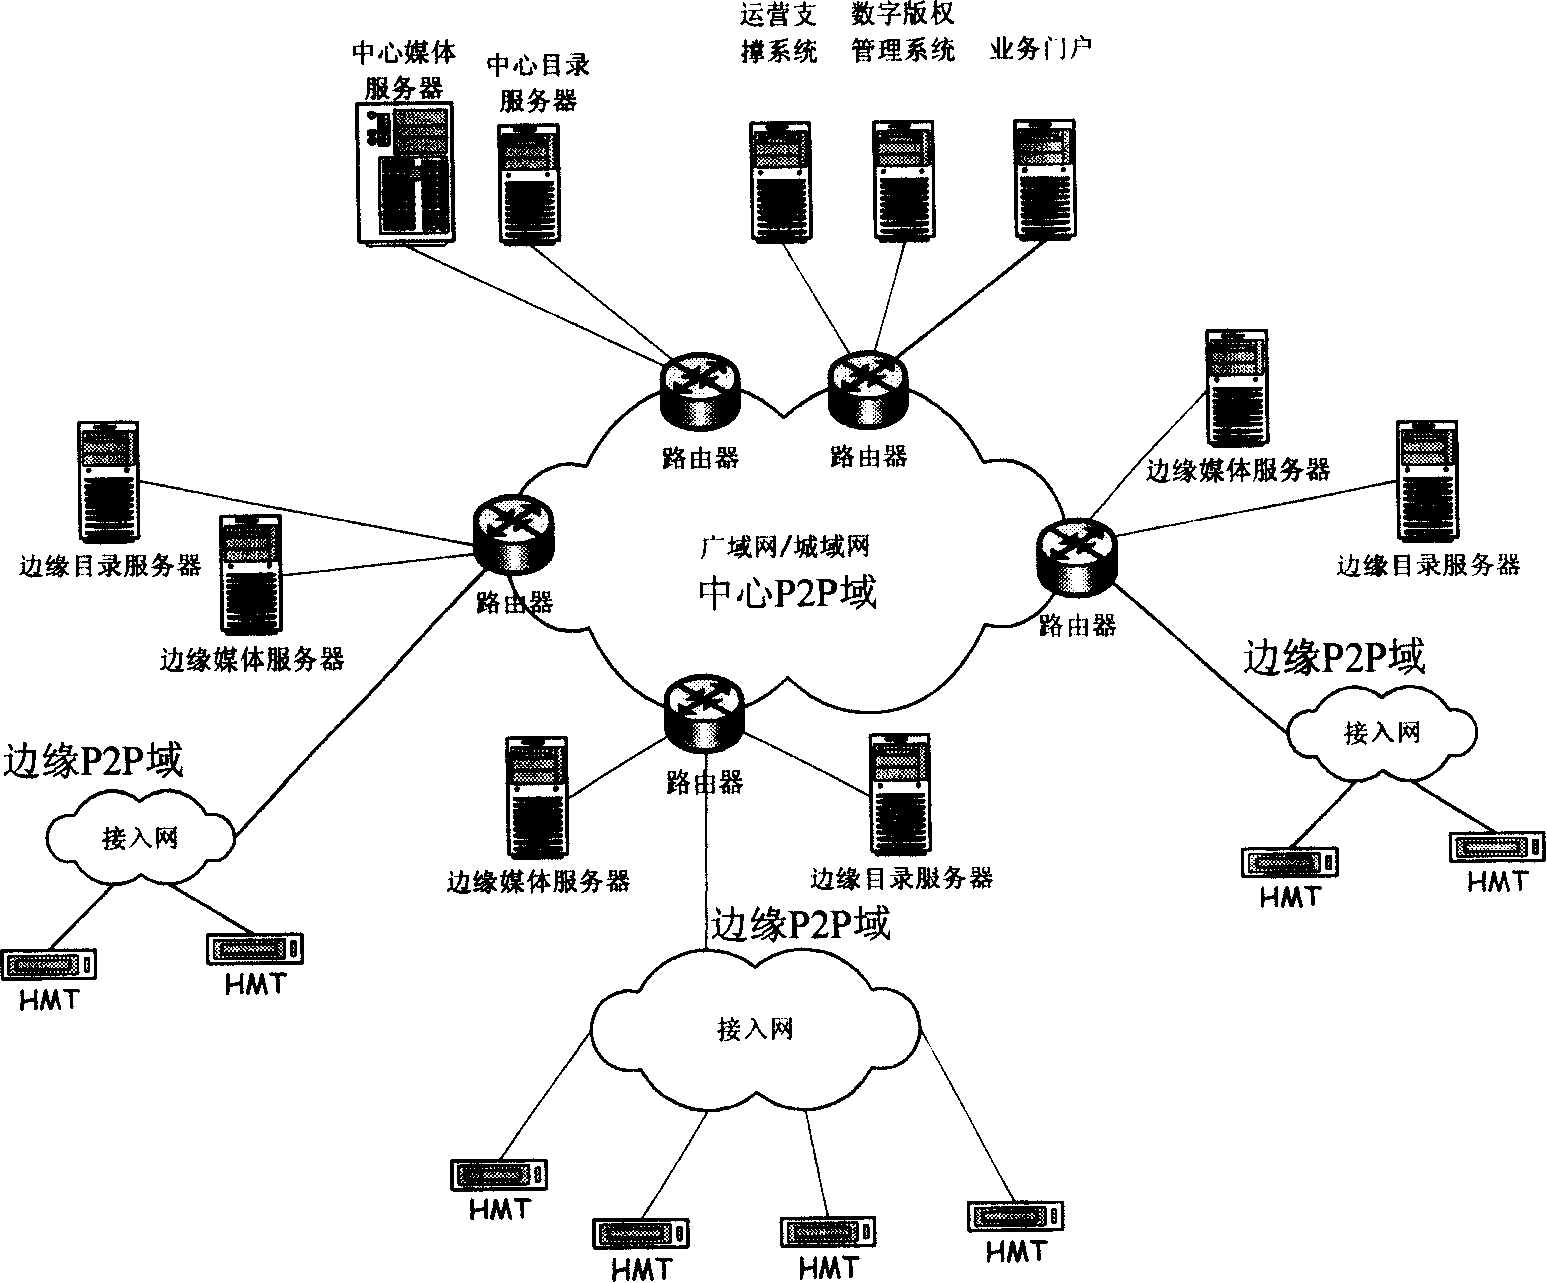 System and method for implementing video-on-demand with peer-to-peer network technique